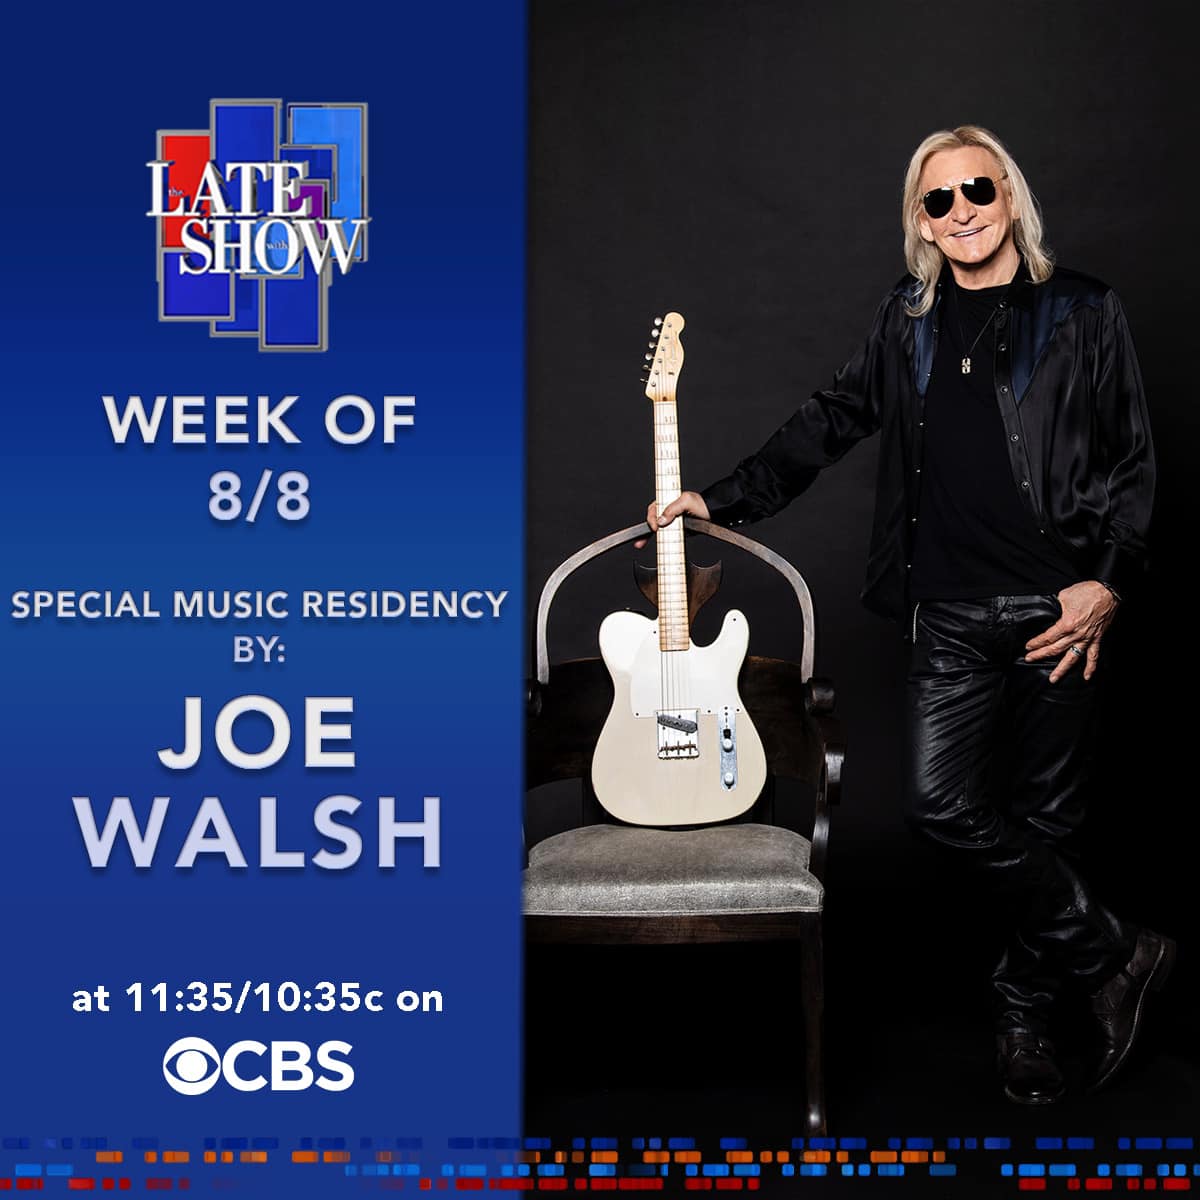 Our founder @JoeWalsh will be moonlighting as one of the first ever resident bandleaders over at The Late Show with Stephen Colbert the week of 8/8. What an honor and what a gas this is going to be! Joe will also share details about VetsAid Ohio!